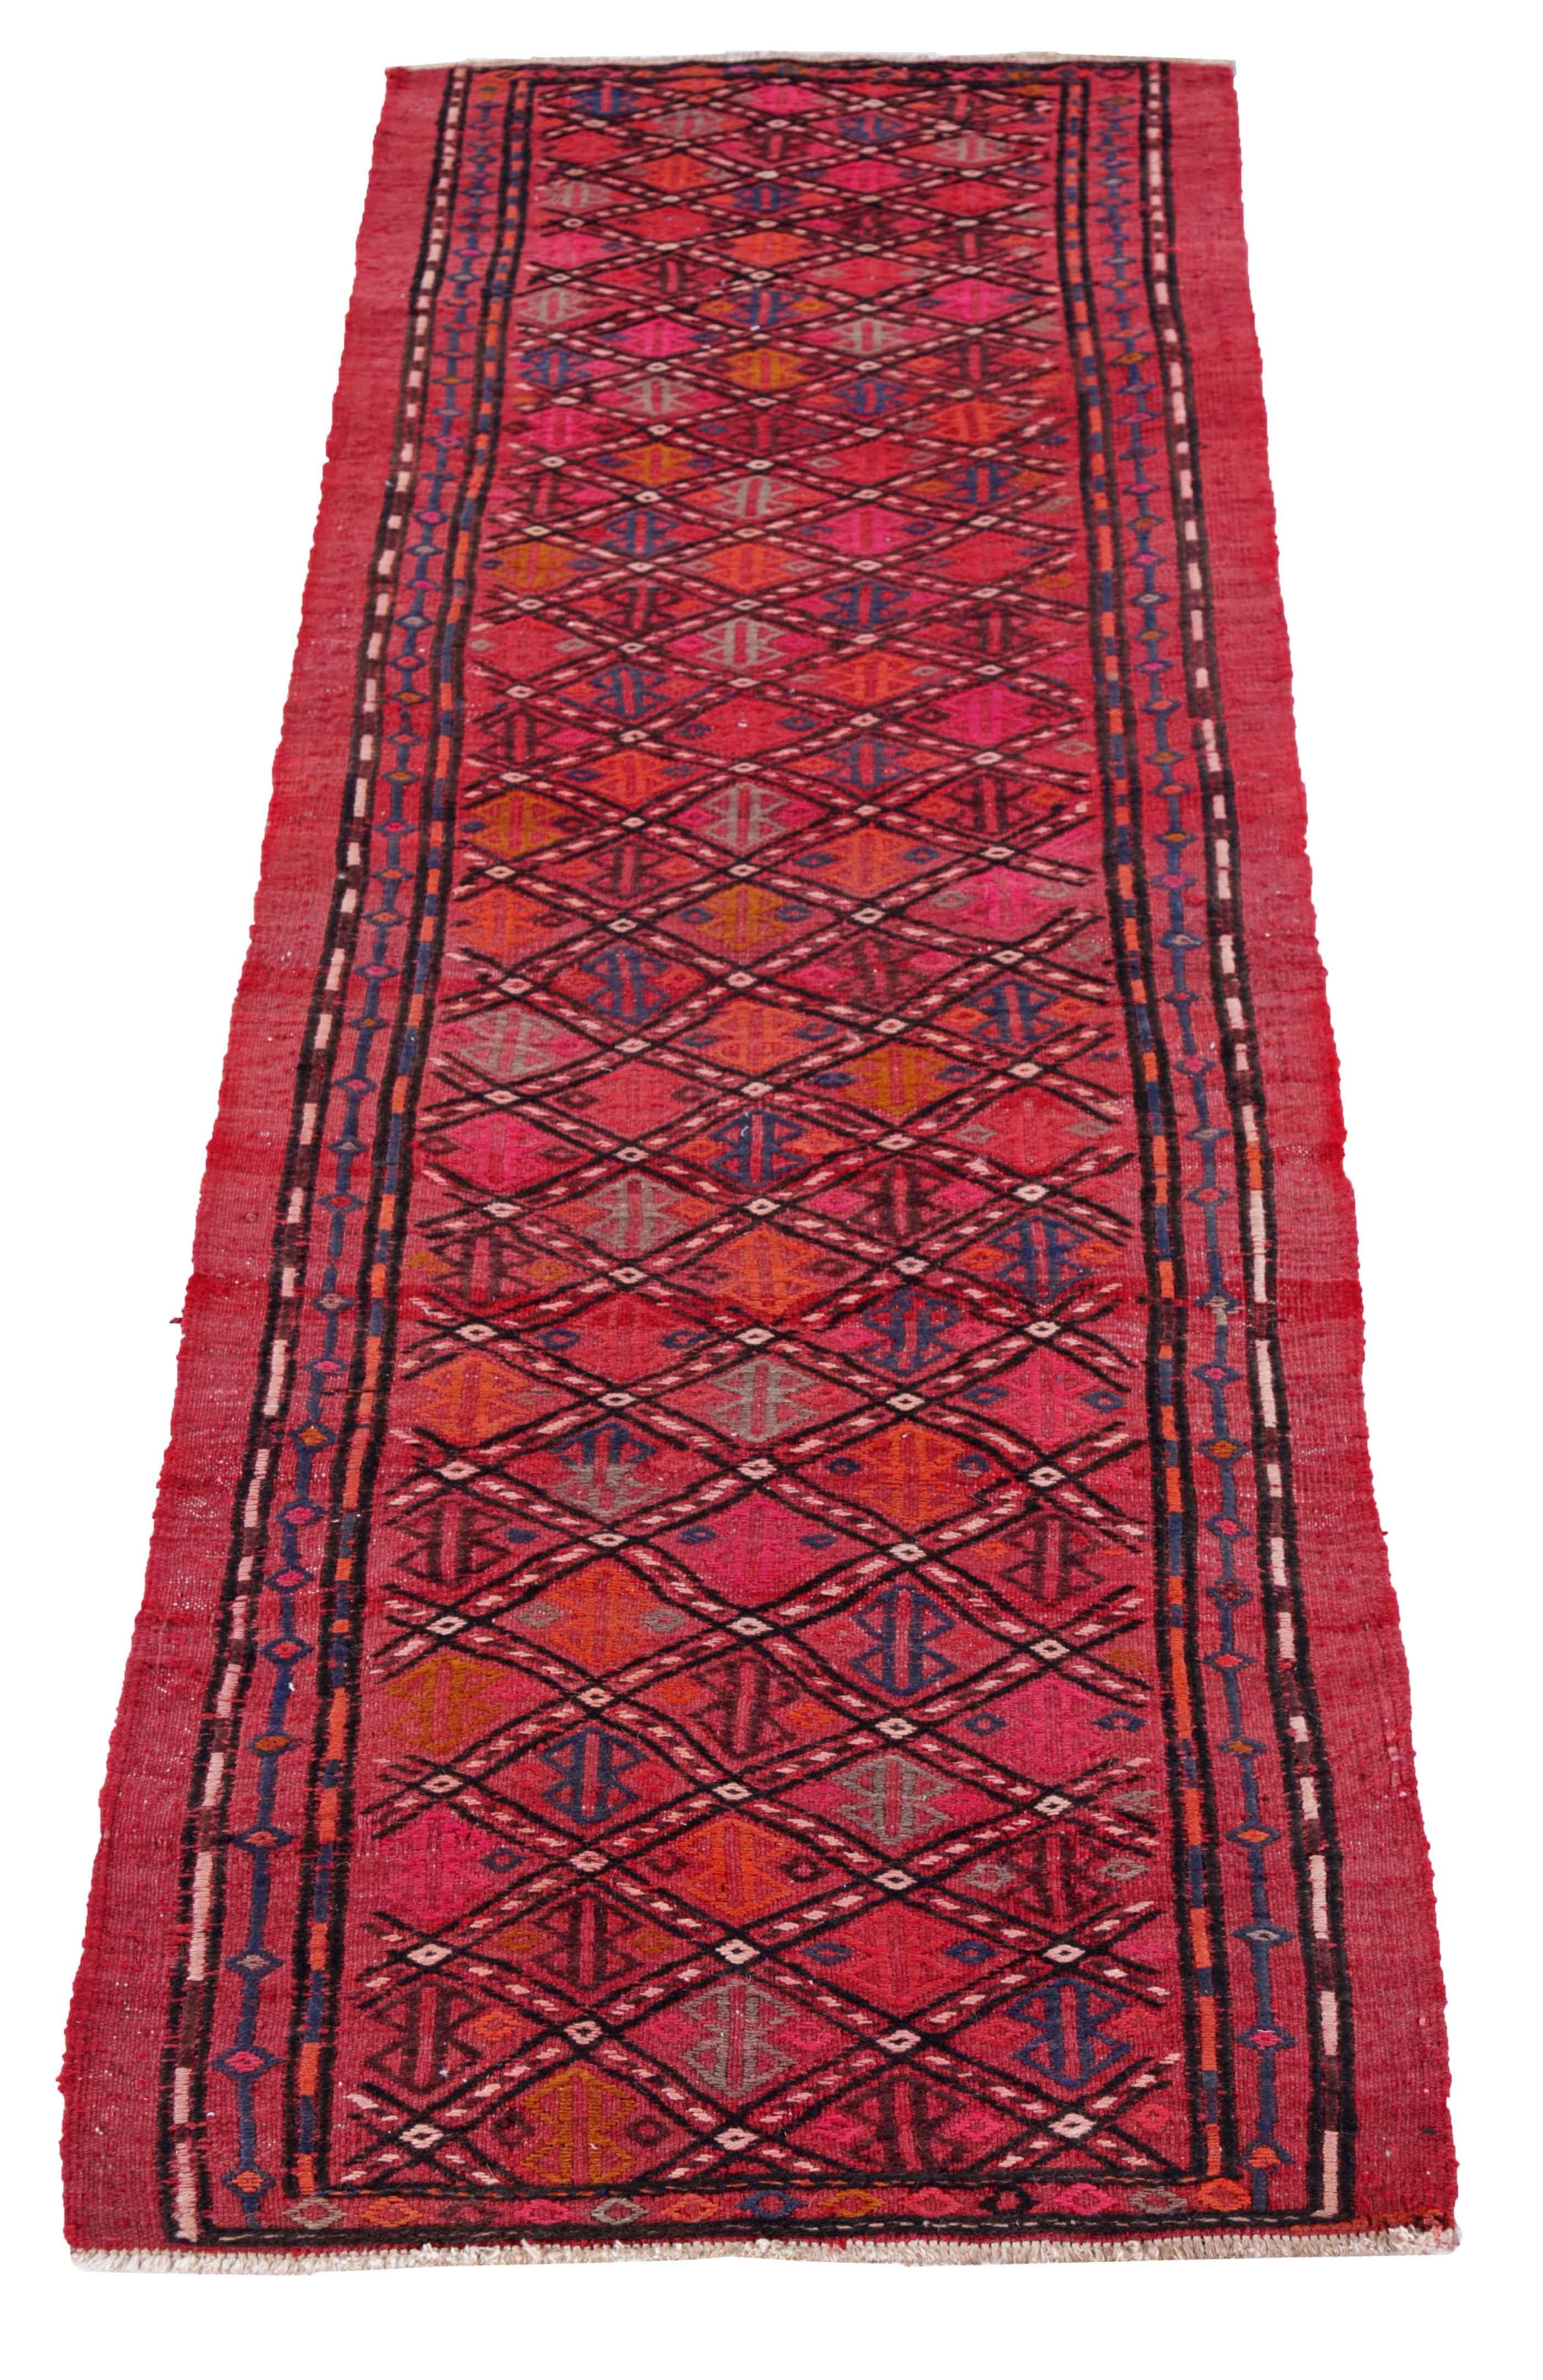 Antique Persian area rug handwoven from the finest sheep’s wool. It’s colored with all-natural vegetable dyes that are safe for humans and pets. It’s a traditional Jajm design handwoven by expert artisans. It’s a lovely area rug that can be